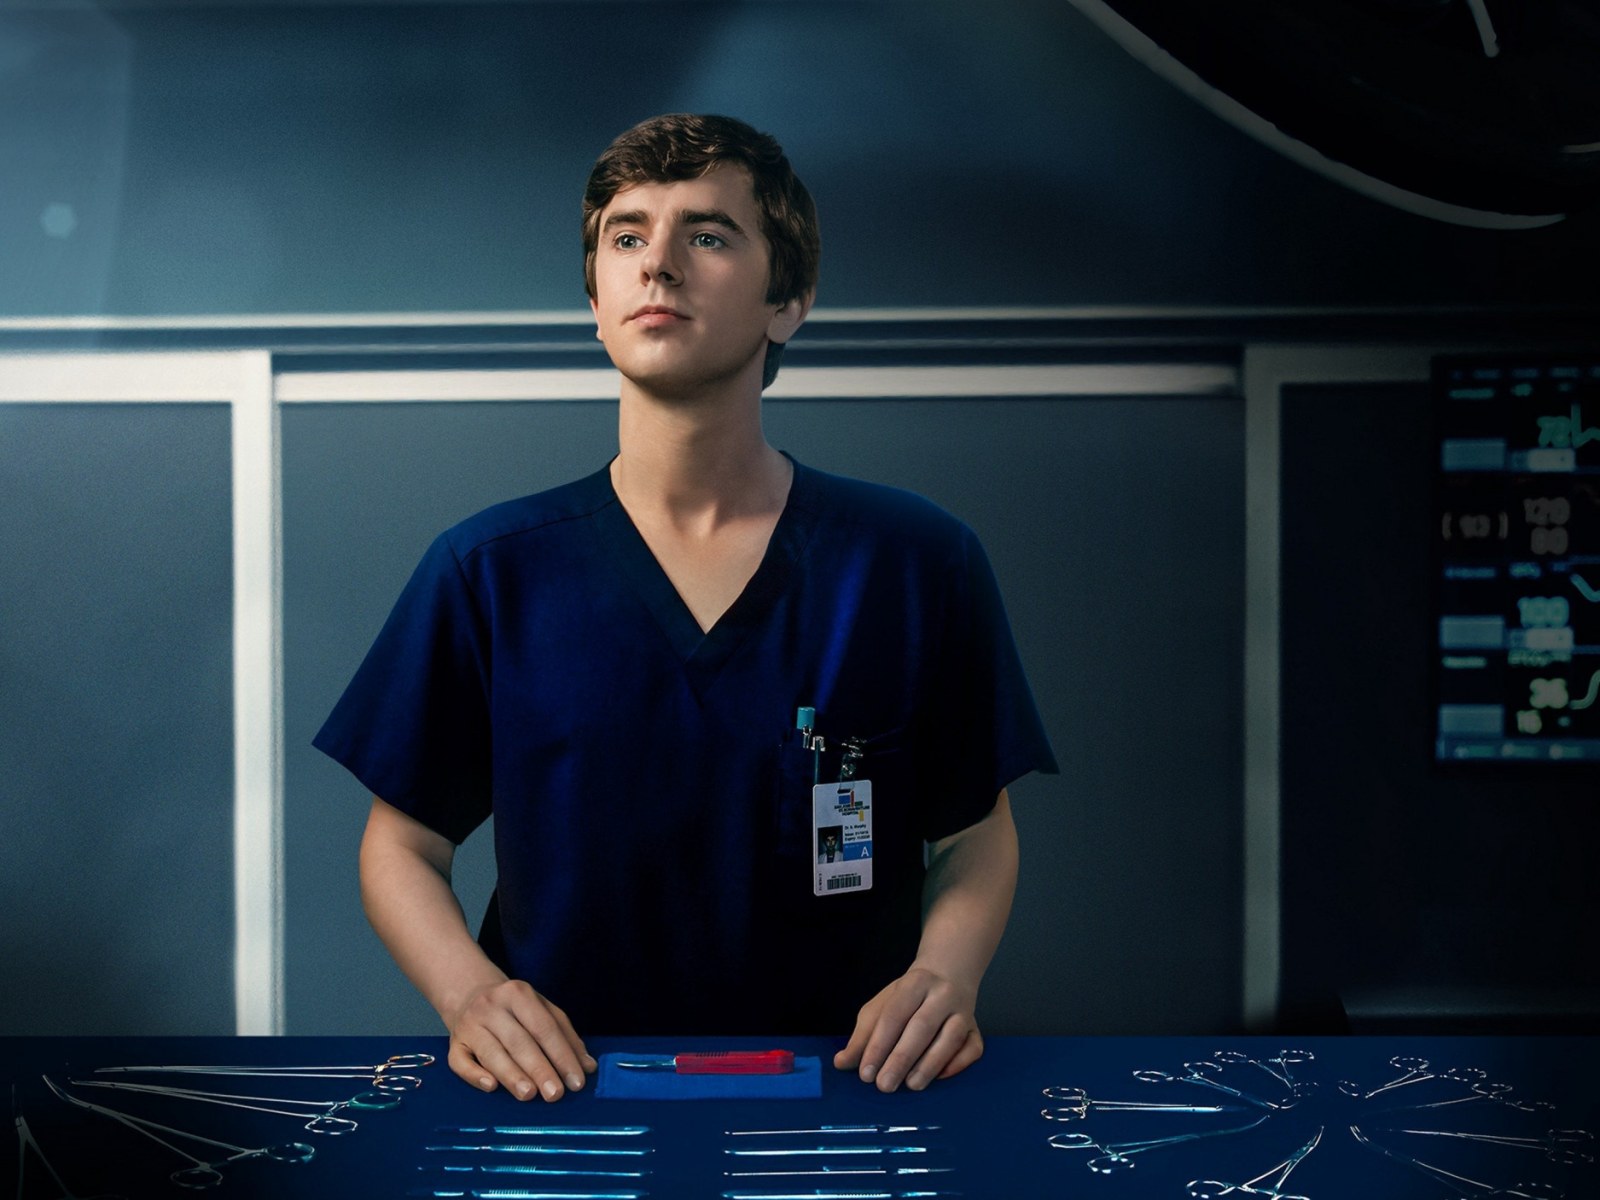 The Good Doctor Season 3 Episode 11 Release Date When Will The Show Return